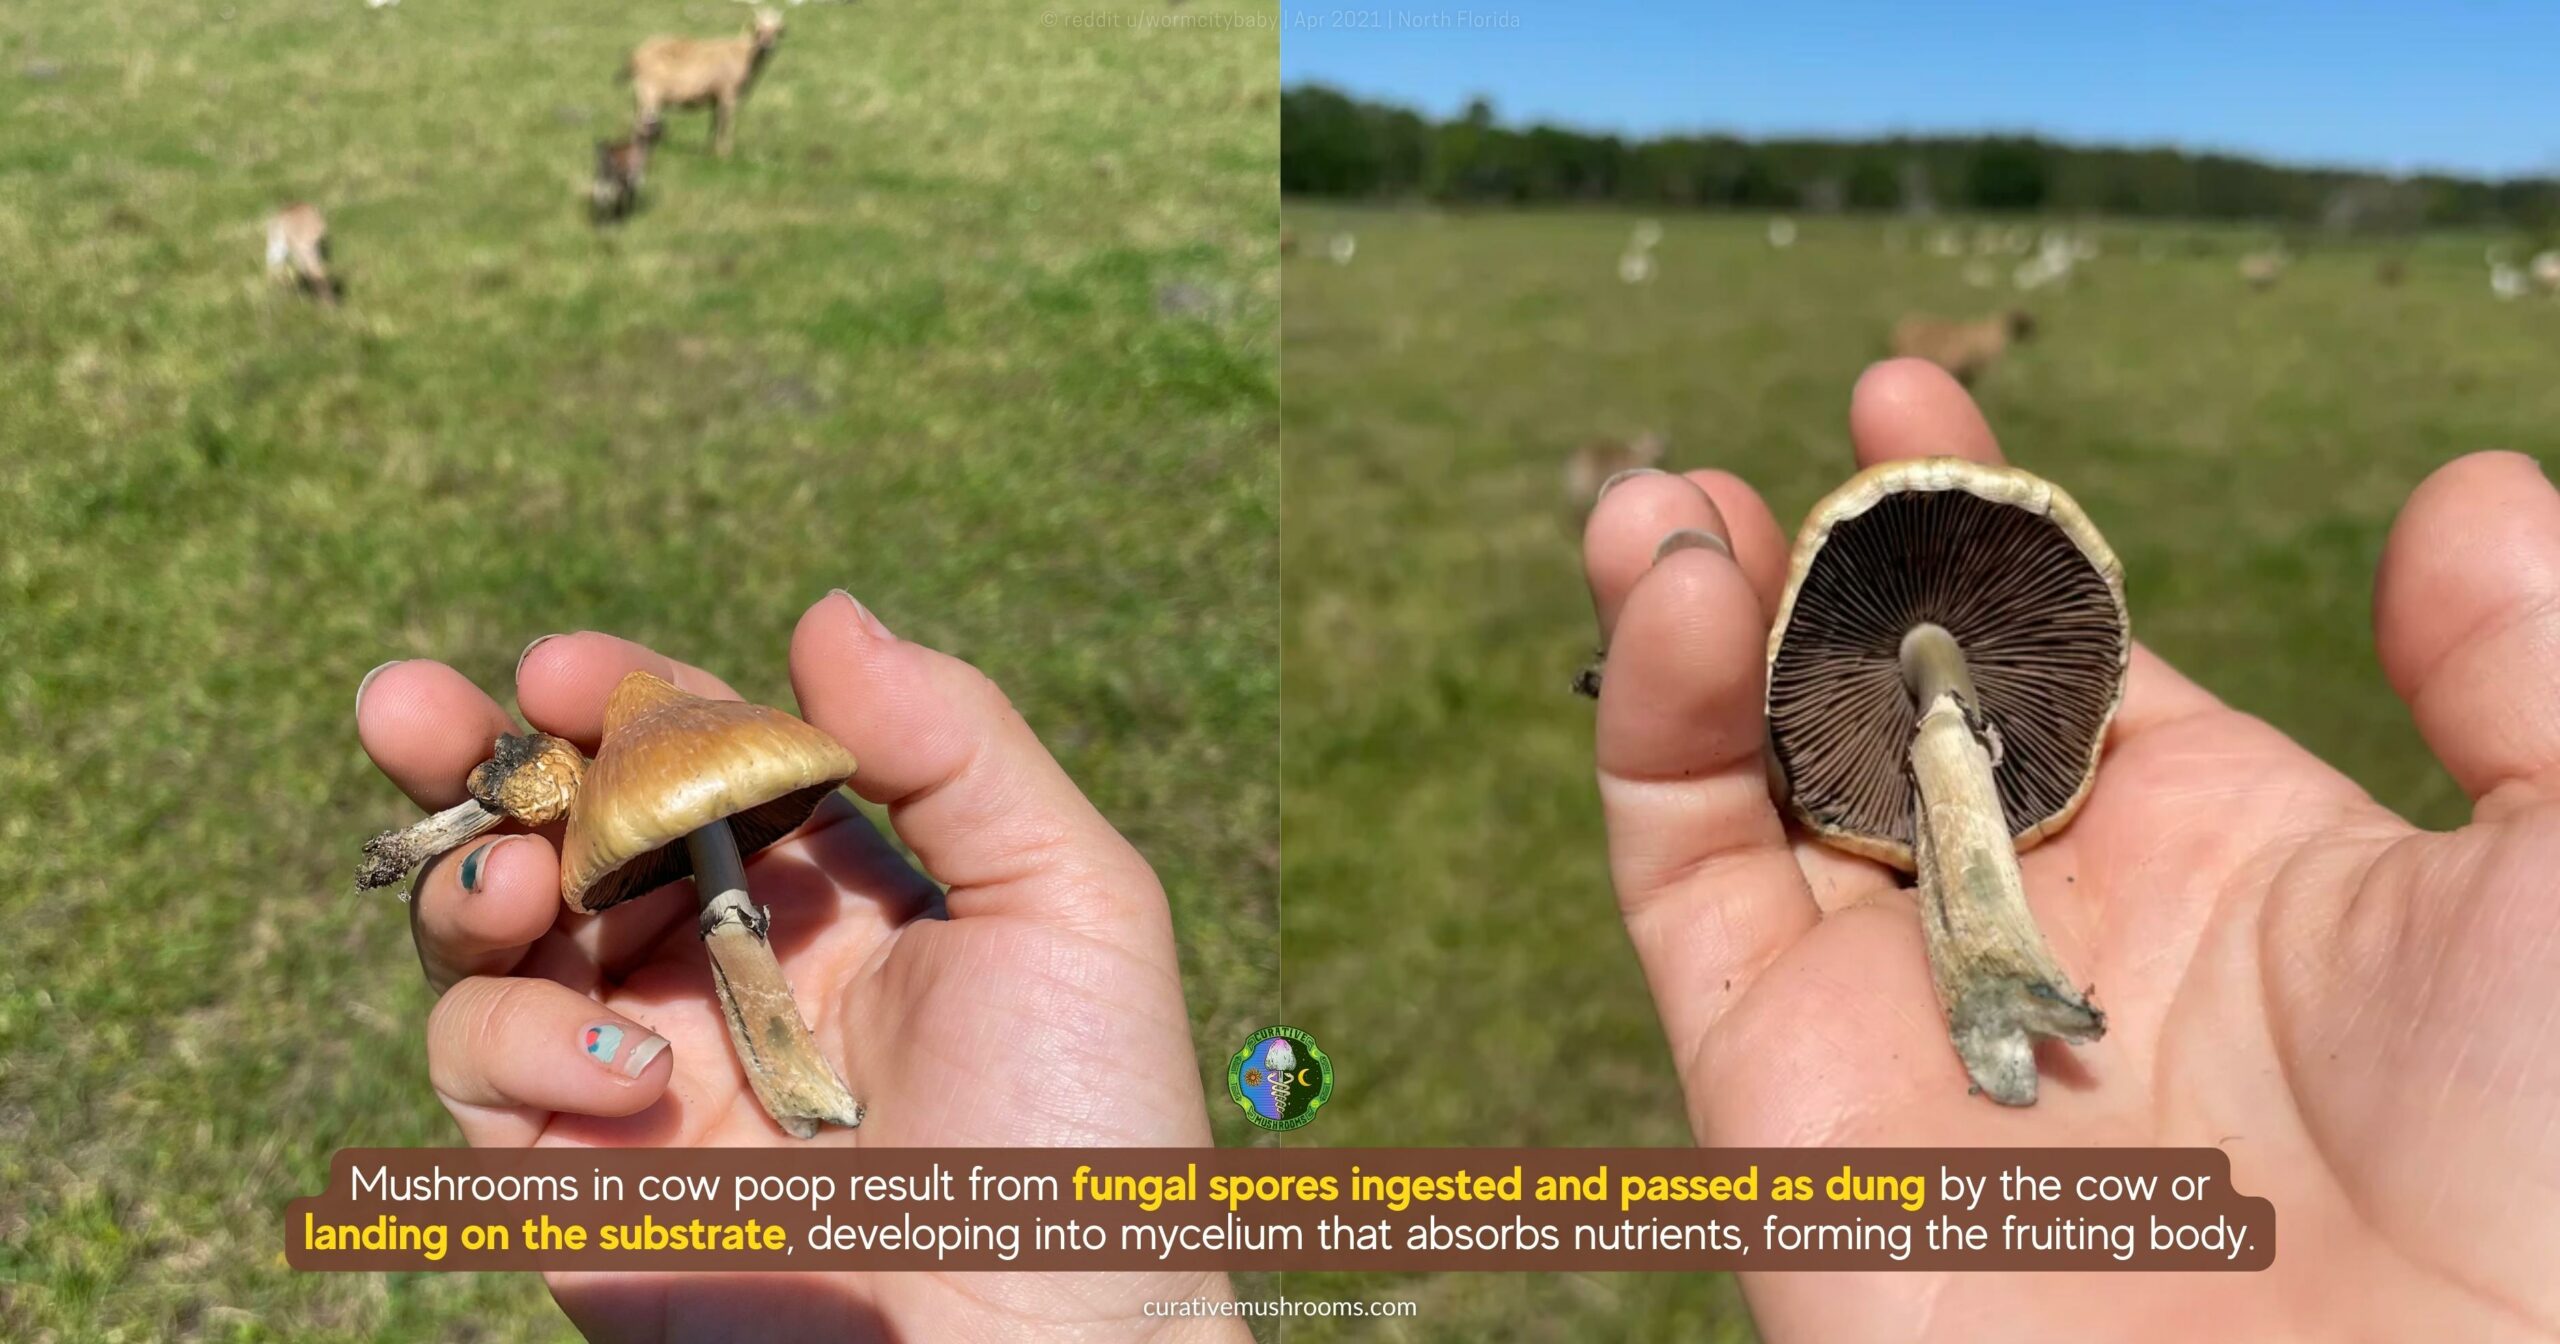 Do mushrooms come from cow poop - fungal spores ingested and passed as dung or spores landing on the substrate developing into mycelium that absorbs nutrients forming fruiting bodies